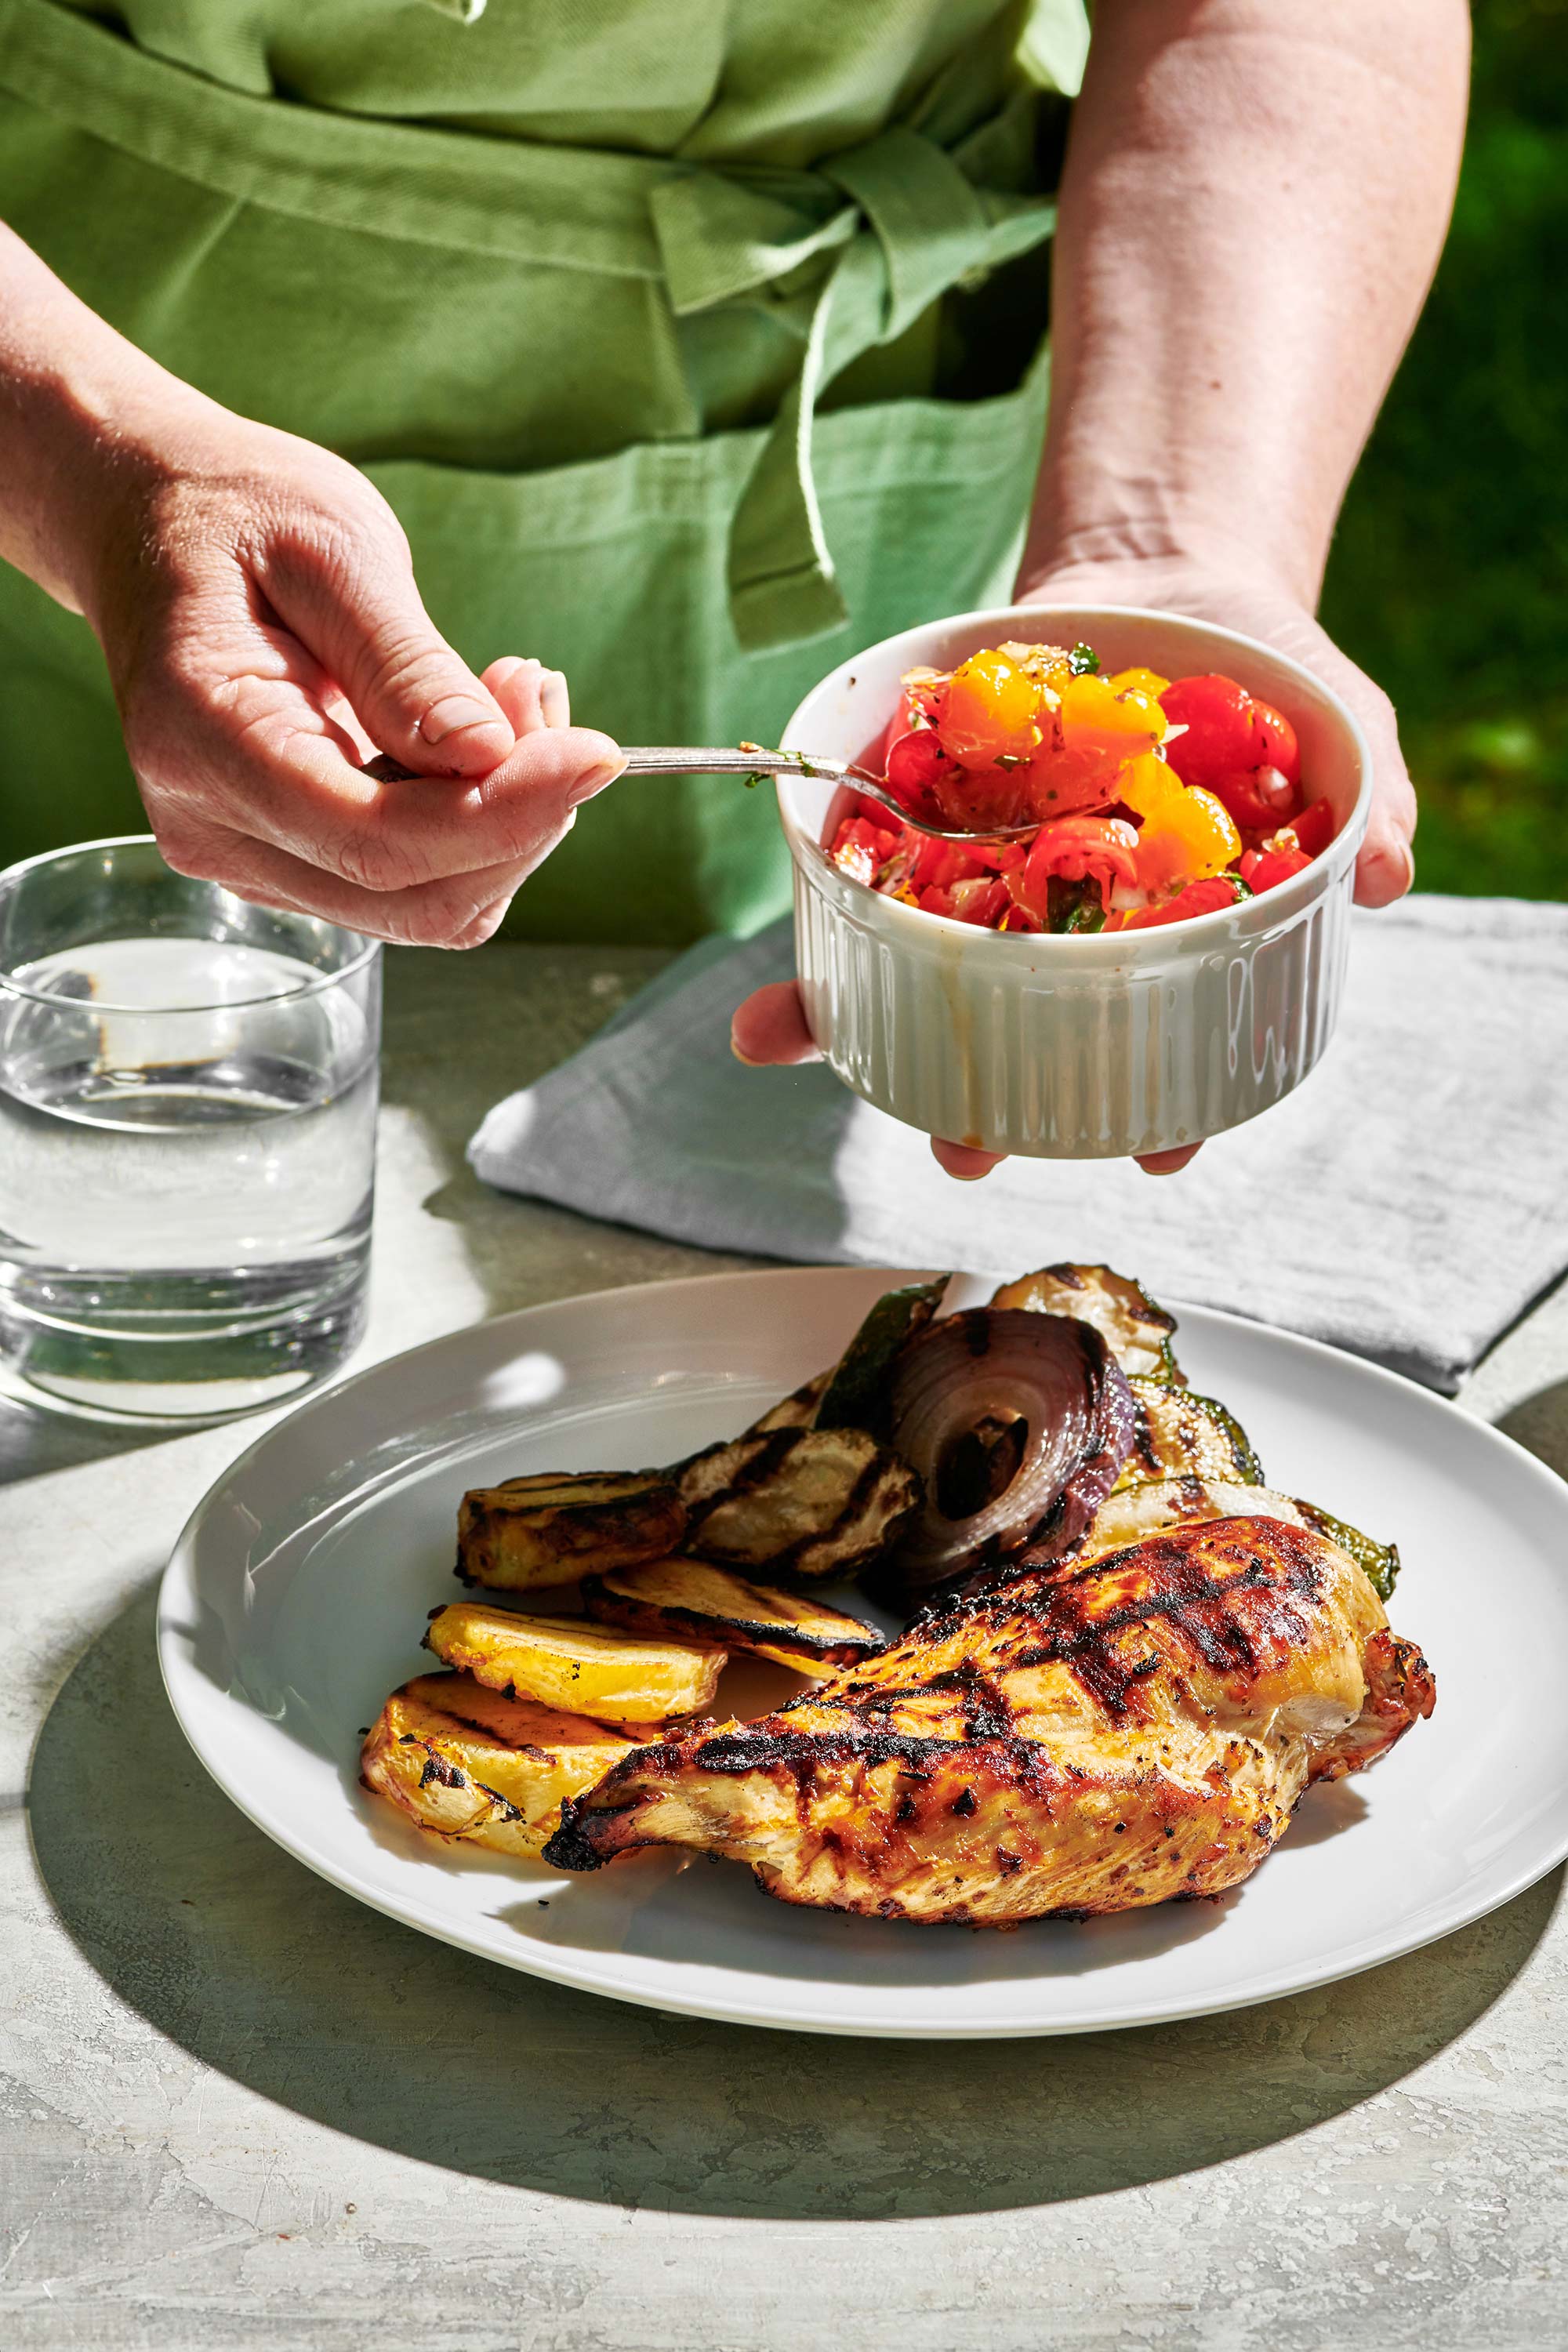 Woman scooping tomatoes onto a plate with a Grilled Chicken Breast.